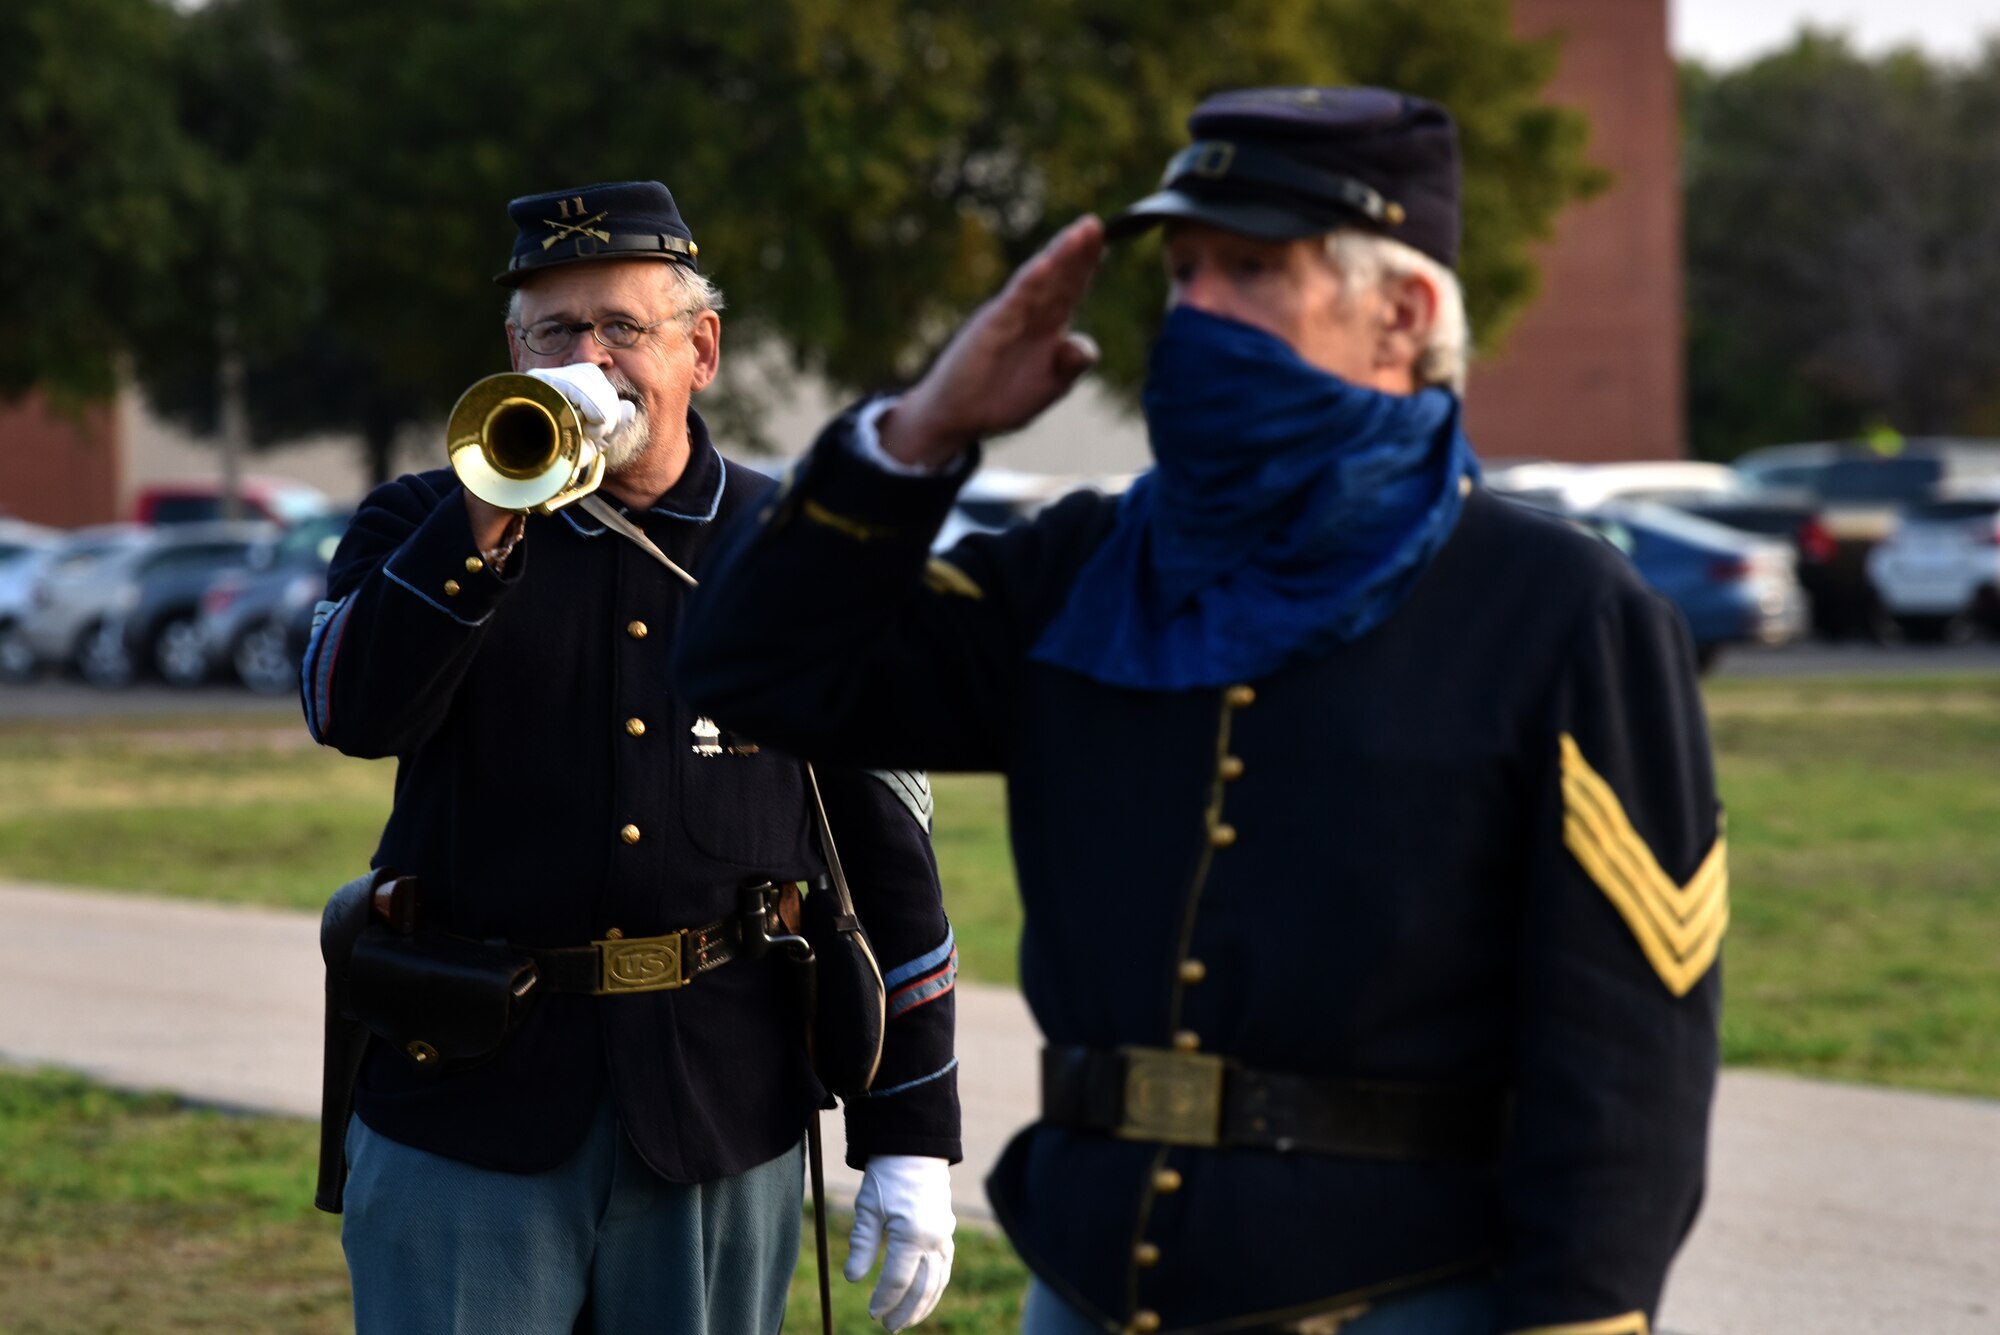 A Fort Concho National Historic Landmark re-enactor salutes the historical accurate 38-star flag while another re-enactor plays the bugle during the Air Force Birthday Celebration on the Parade Field at Goodfellow Air Force Base, Texas, Sept. 18, 2020. The re-enactors raised the flag to honor those who were the first to serve in all black regiments in the Army during the 19th century. (U.S. Air Force photo by Staff Sgt. Seraiah Wolf)